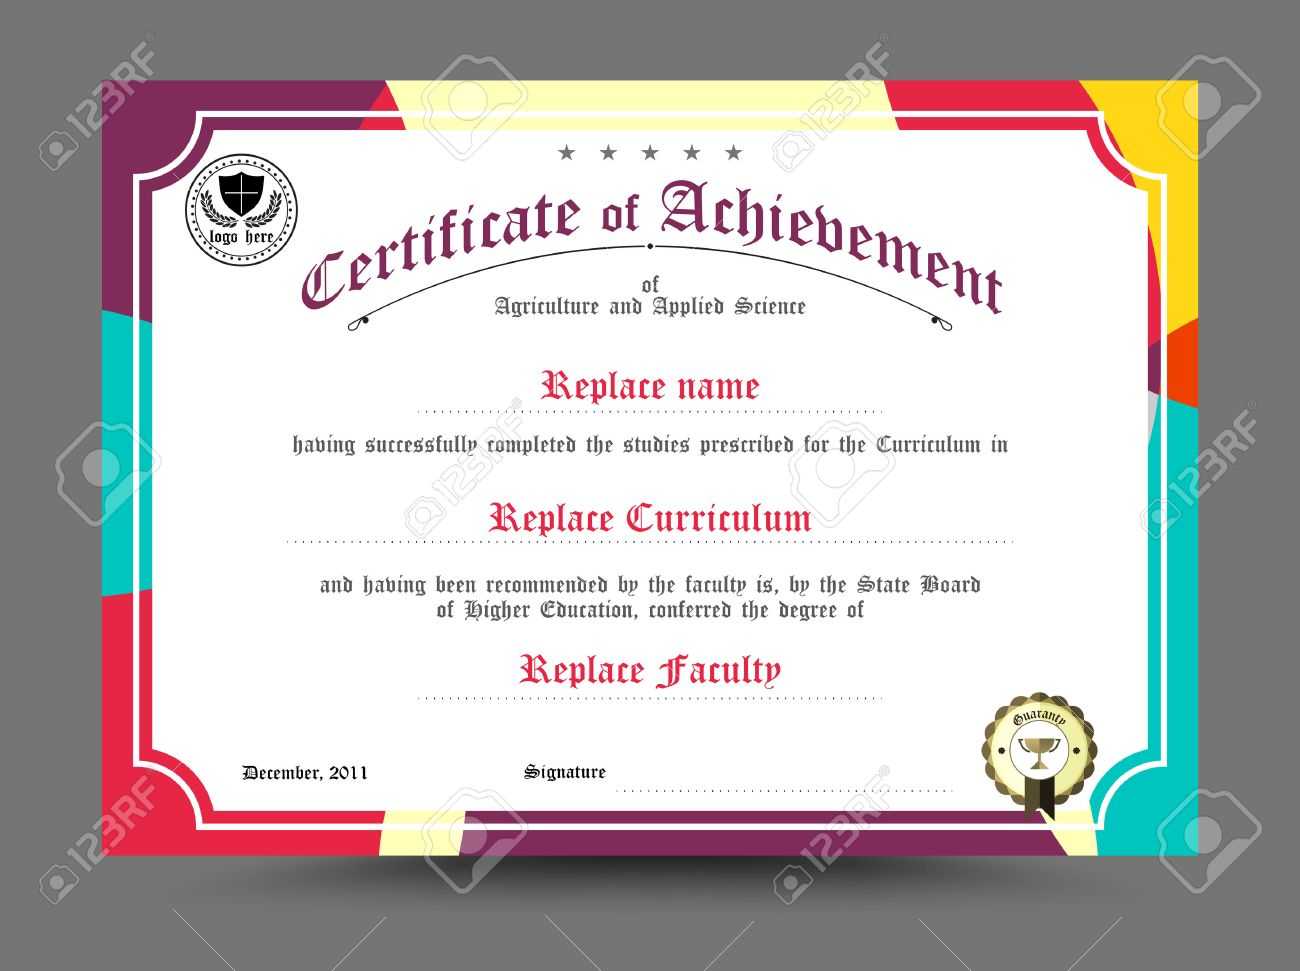 Diploma Certificate Template Design. Vector Illustration. Pertaining To Design A Certificate Template